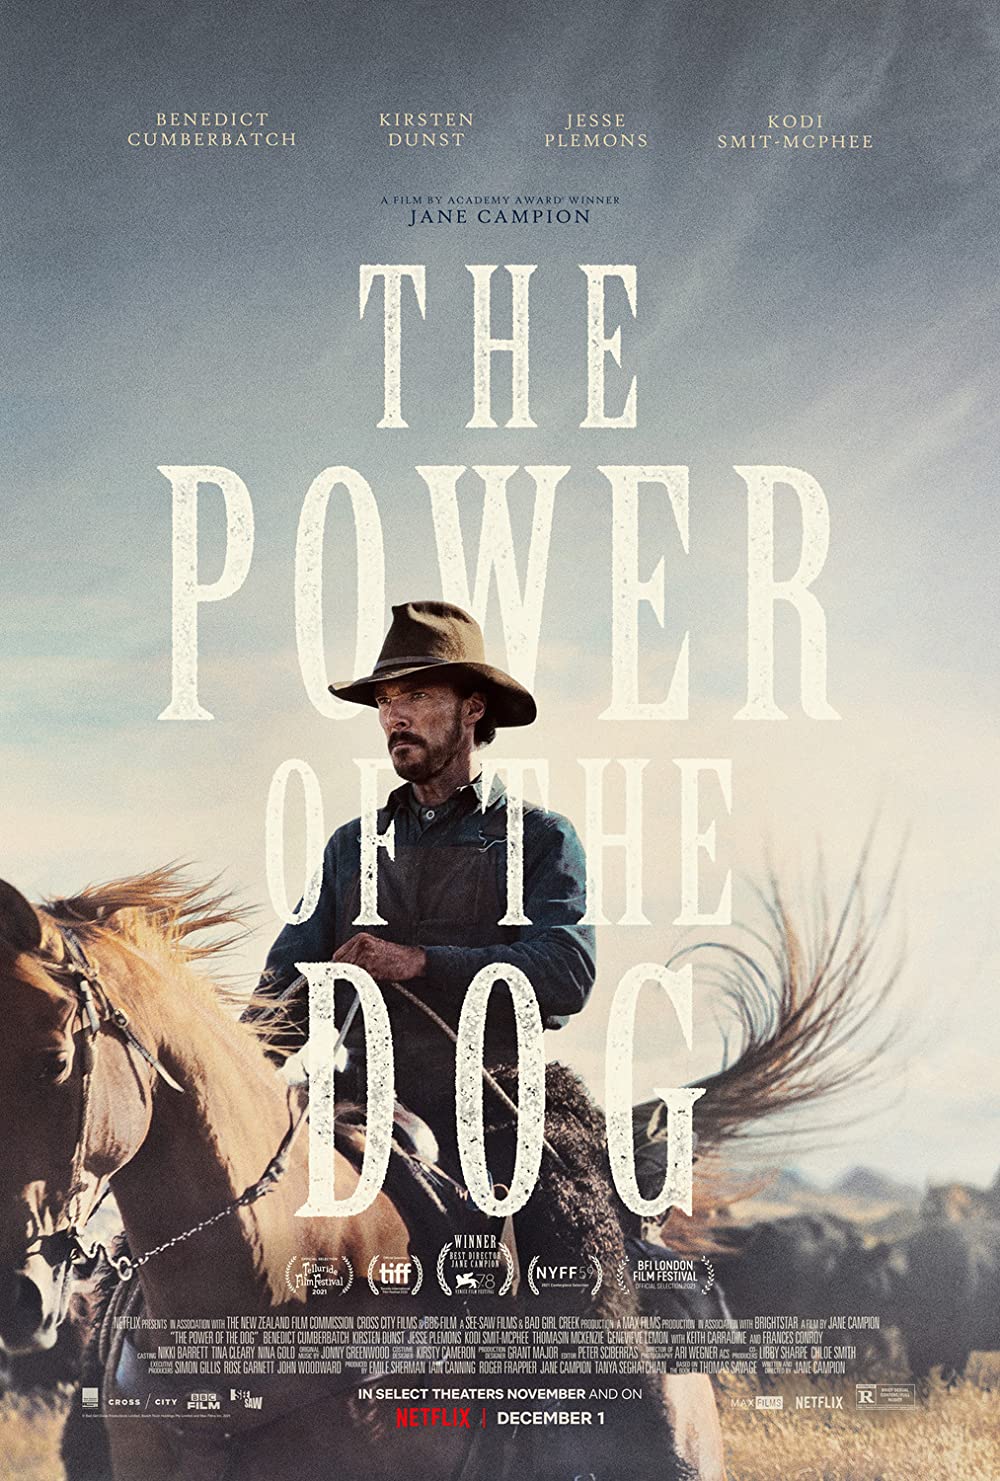 Power of the dog